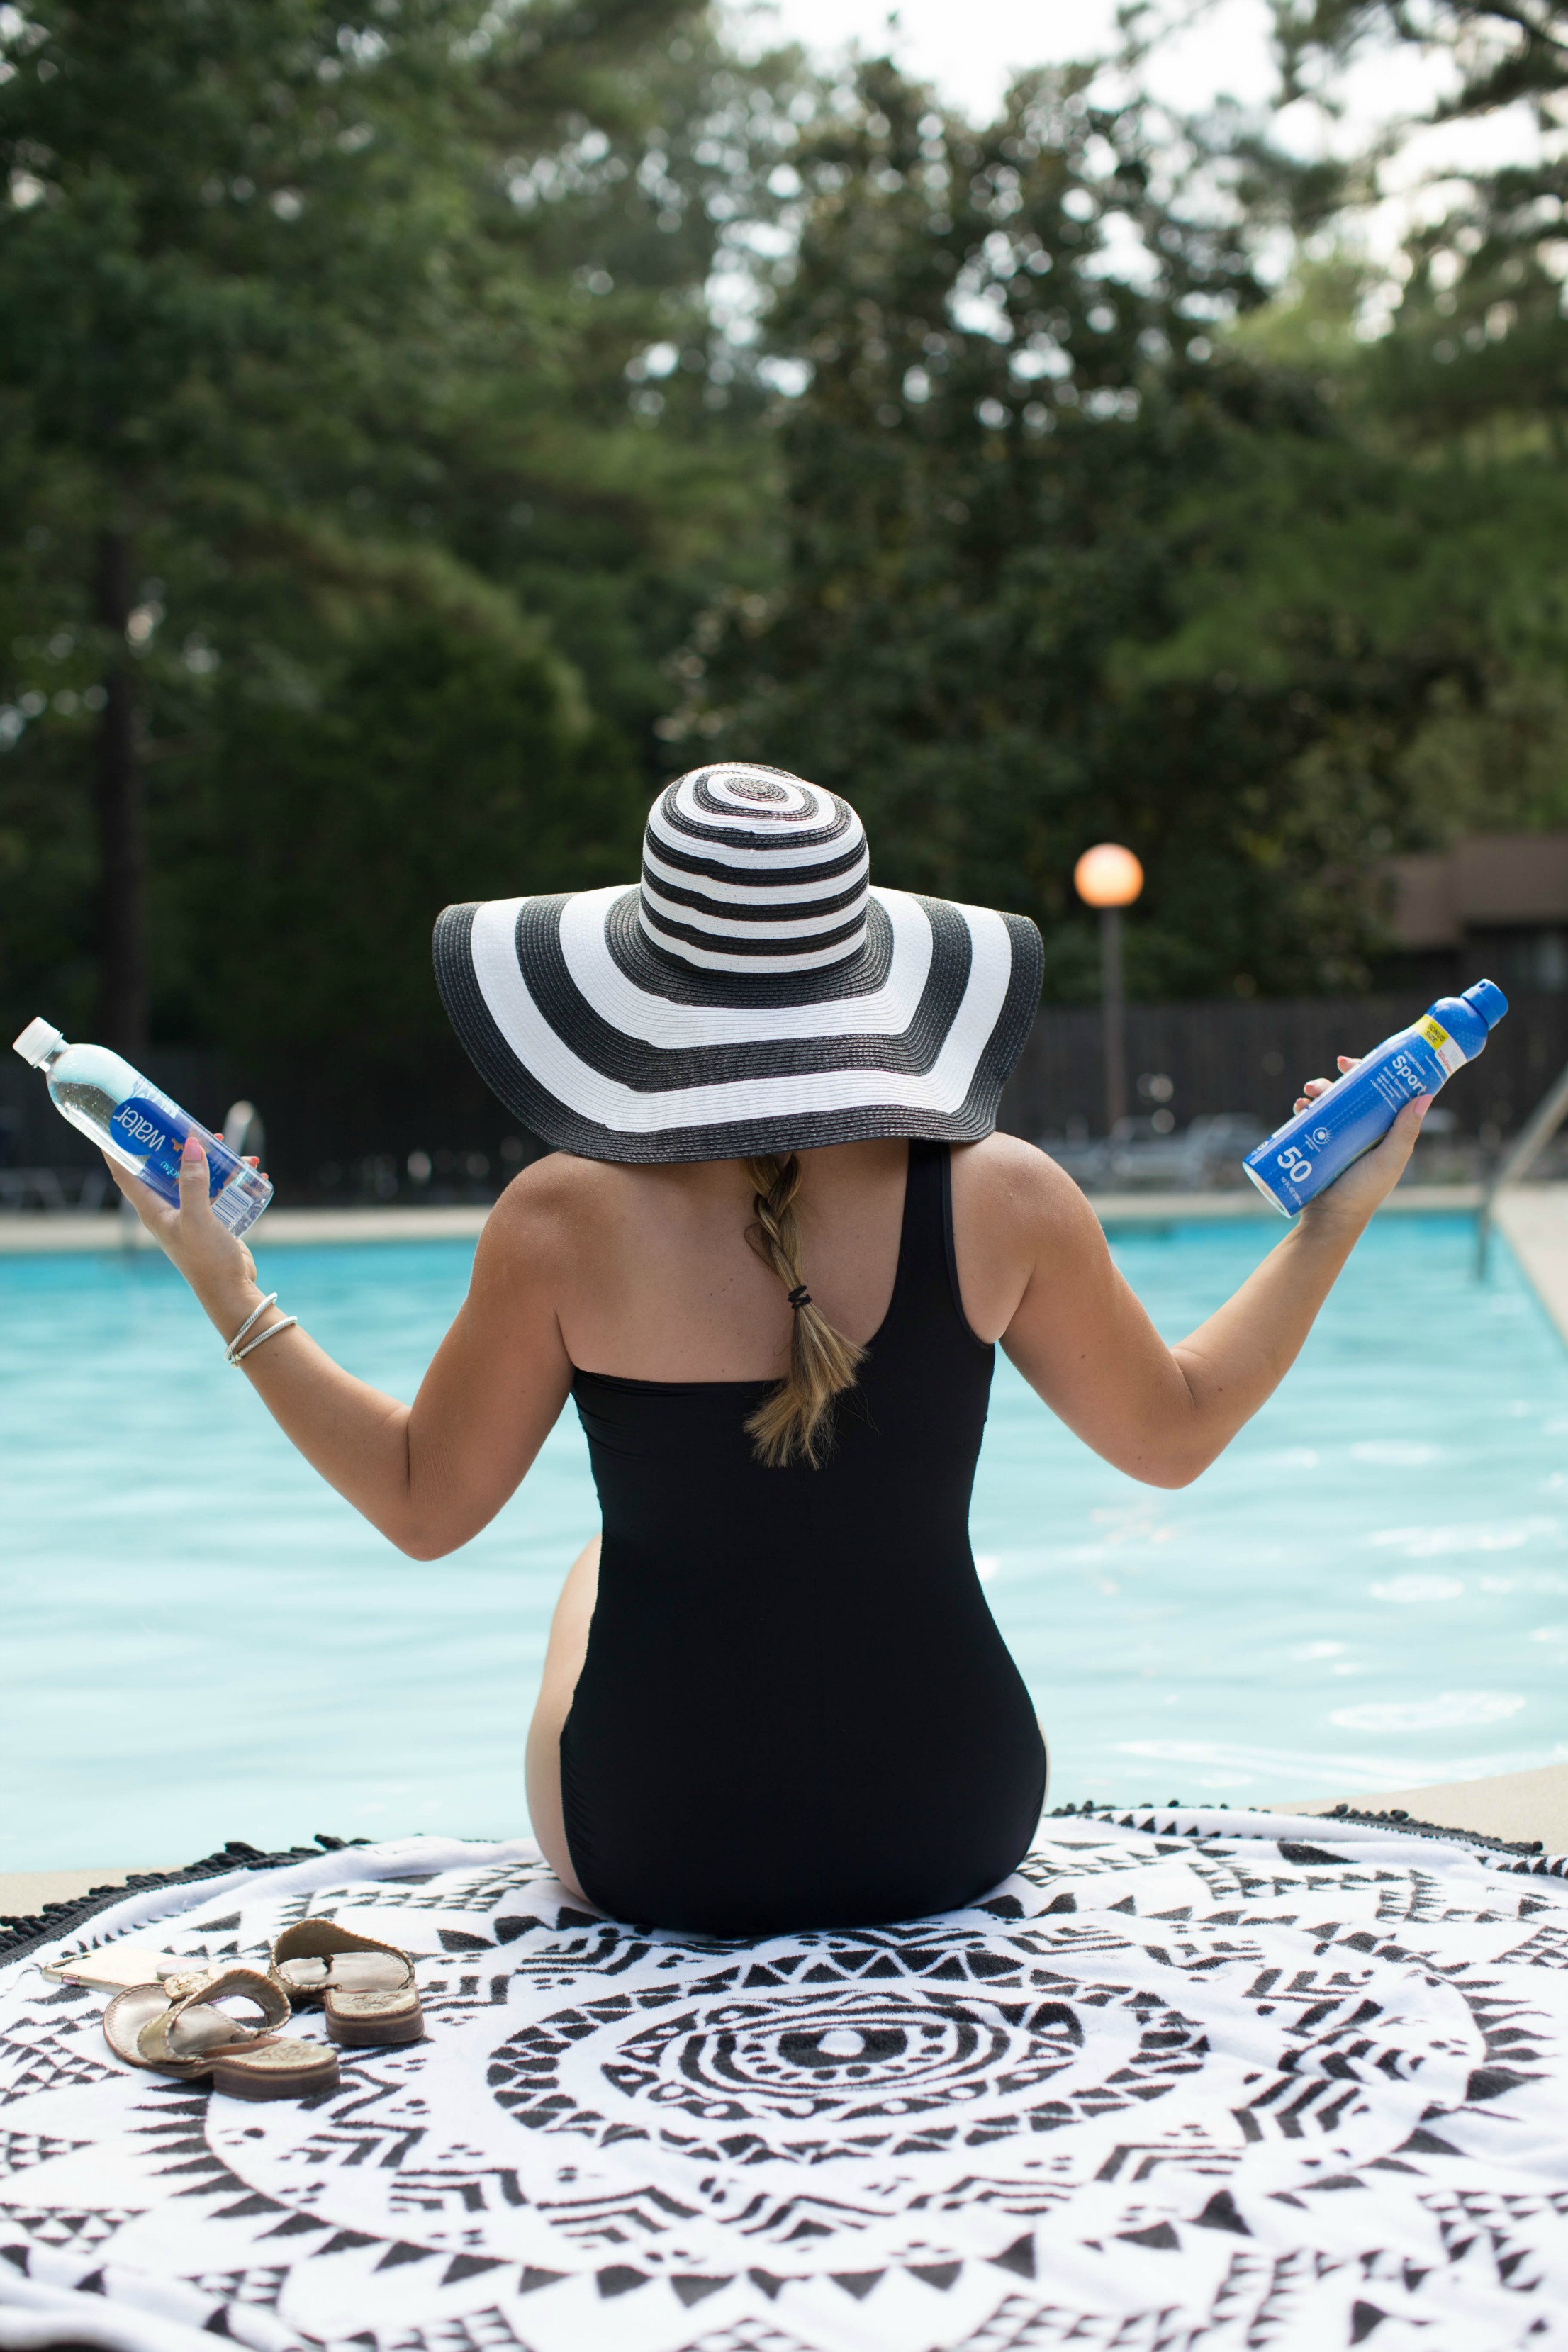 8 Pool Bag Essentials by NC blogger Coffee Beans and Bobby Pins